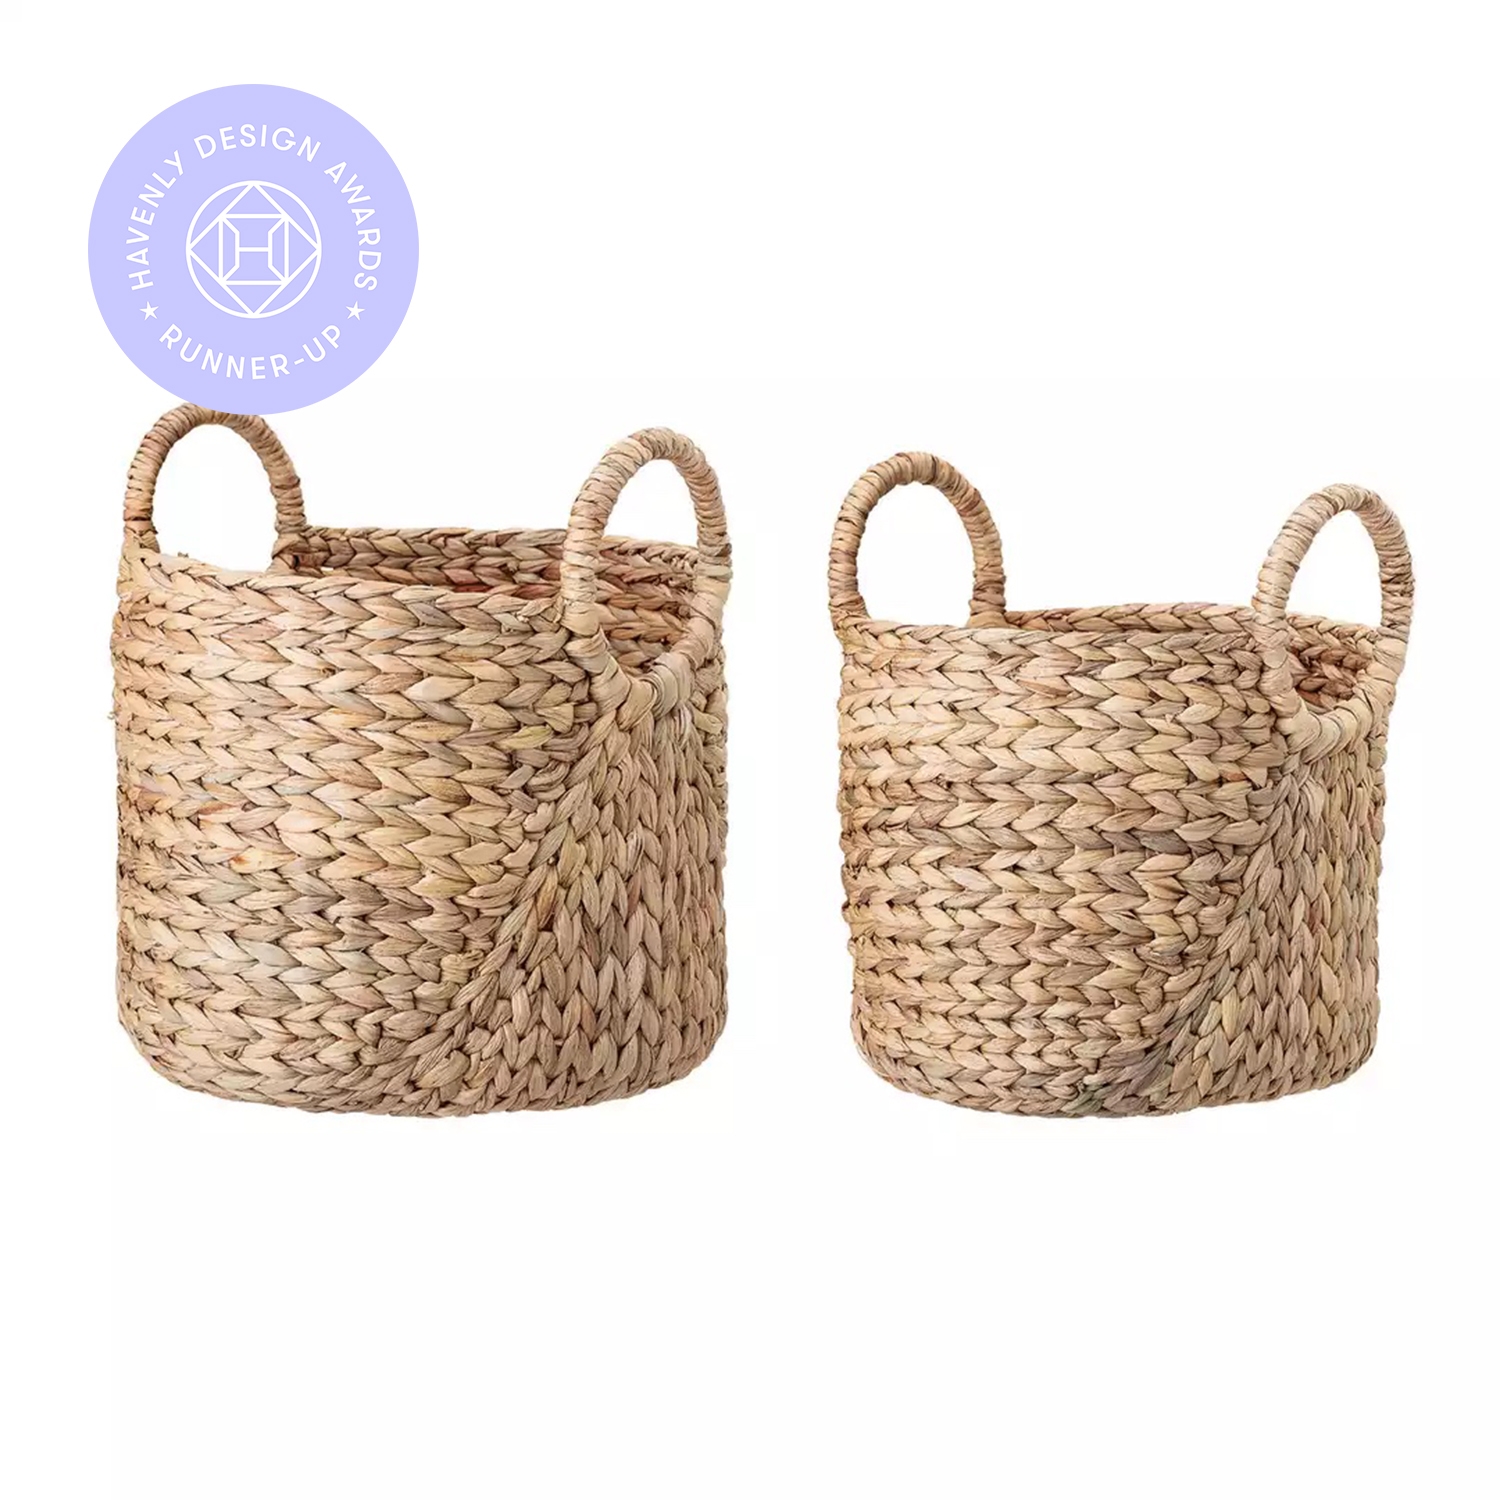 Seagrass Baskets with Handles, Set of 2 - Image 1